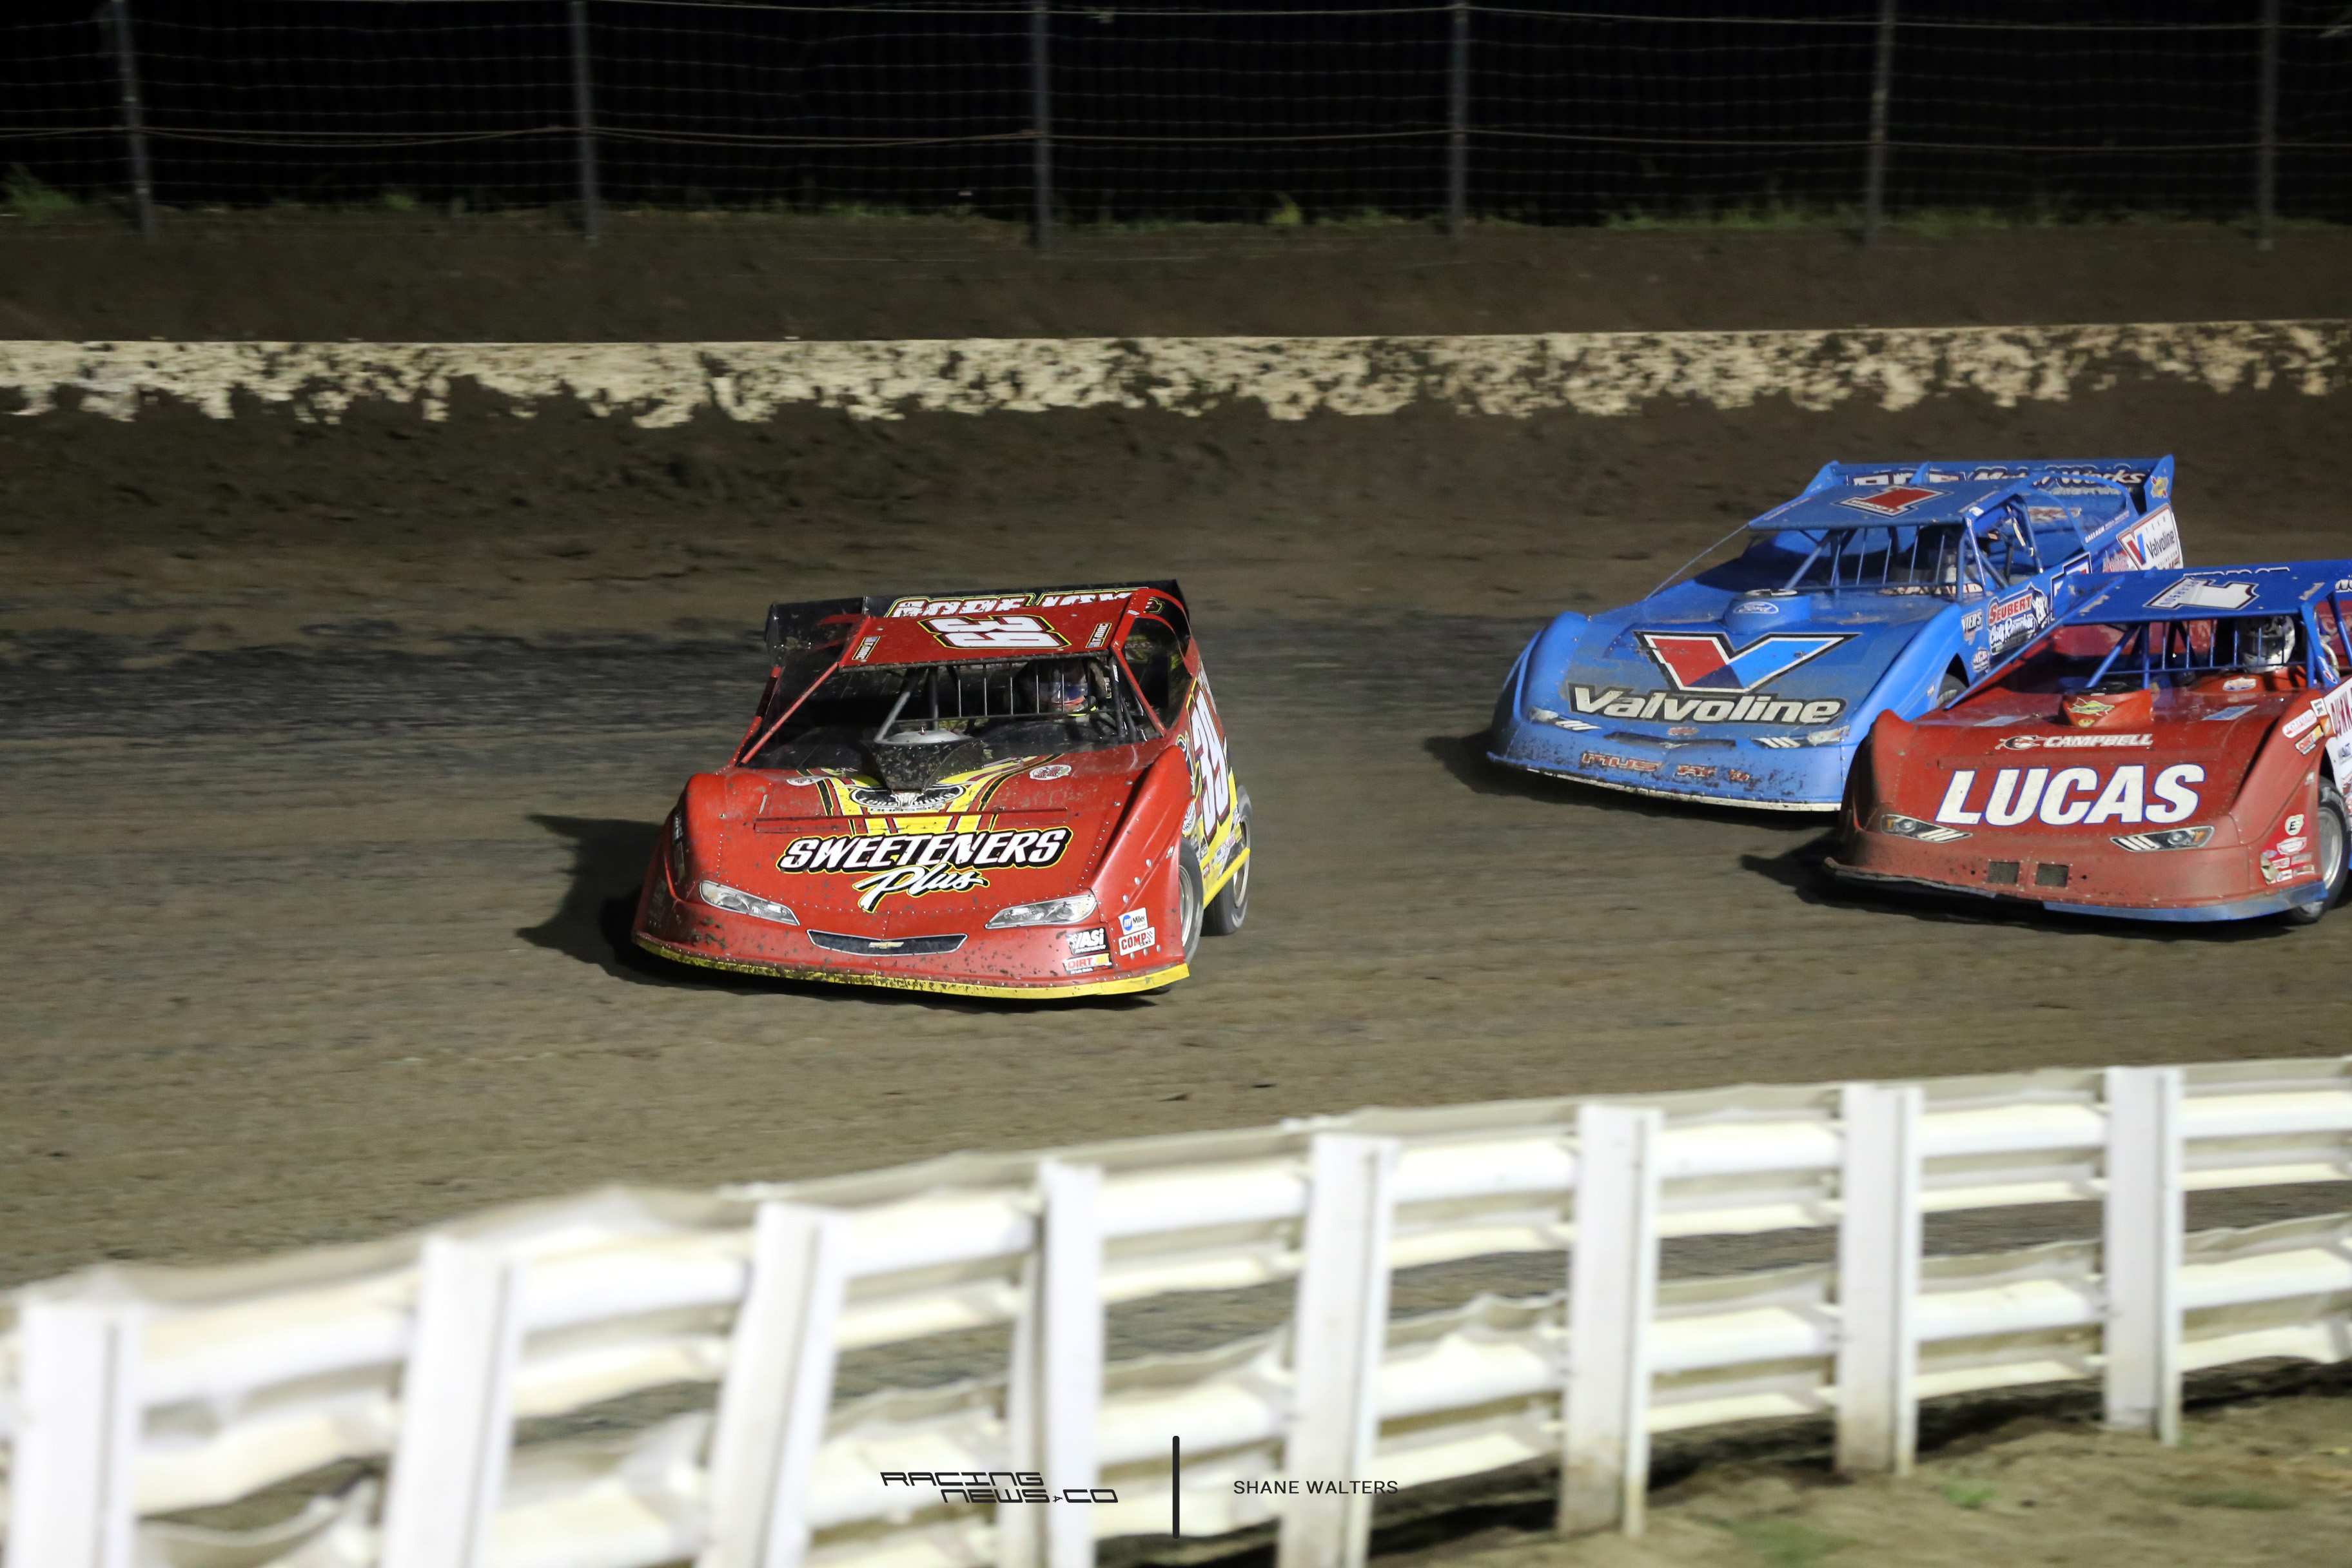 Lucas Oil Late Model portion of Silver Dollar purse is over $000